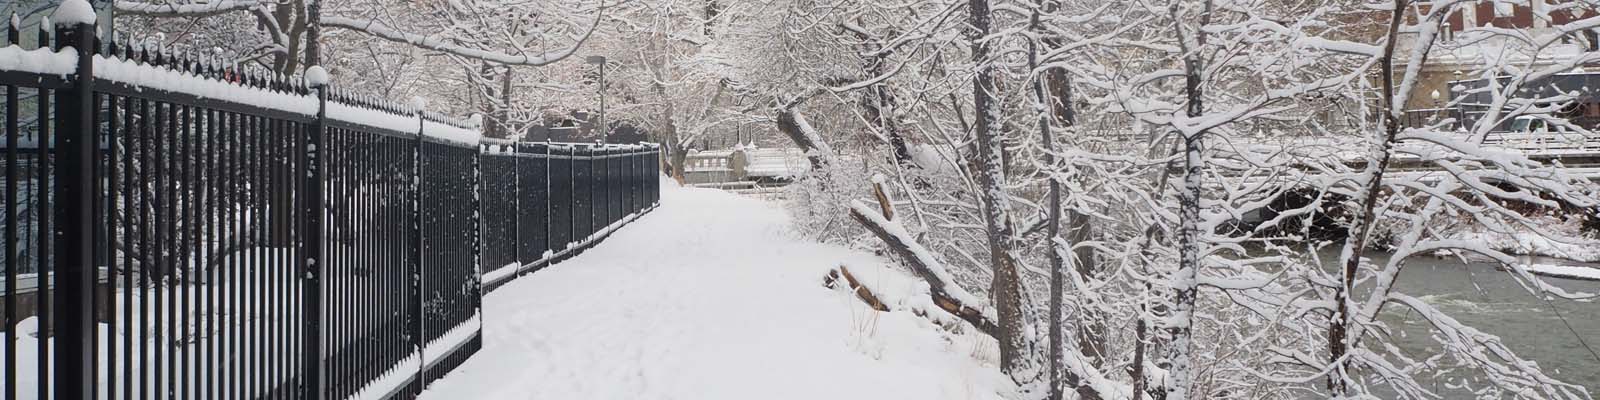 This is an image a snowy path in Reno. ASTA-USA provides professional translation services in this city.